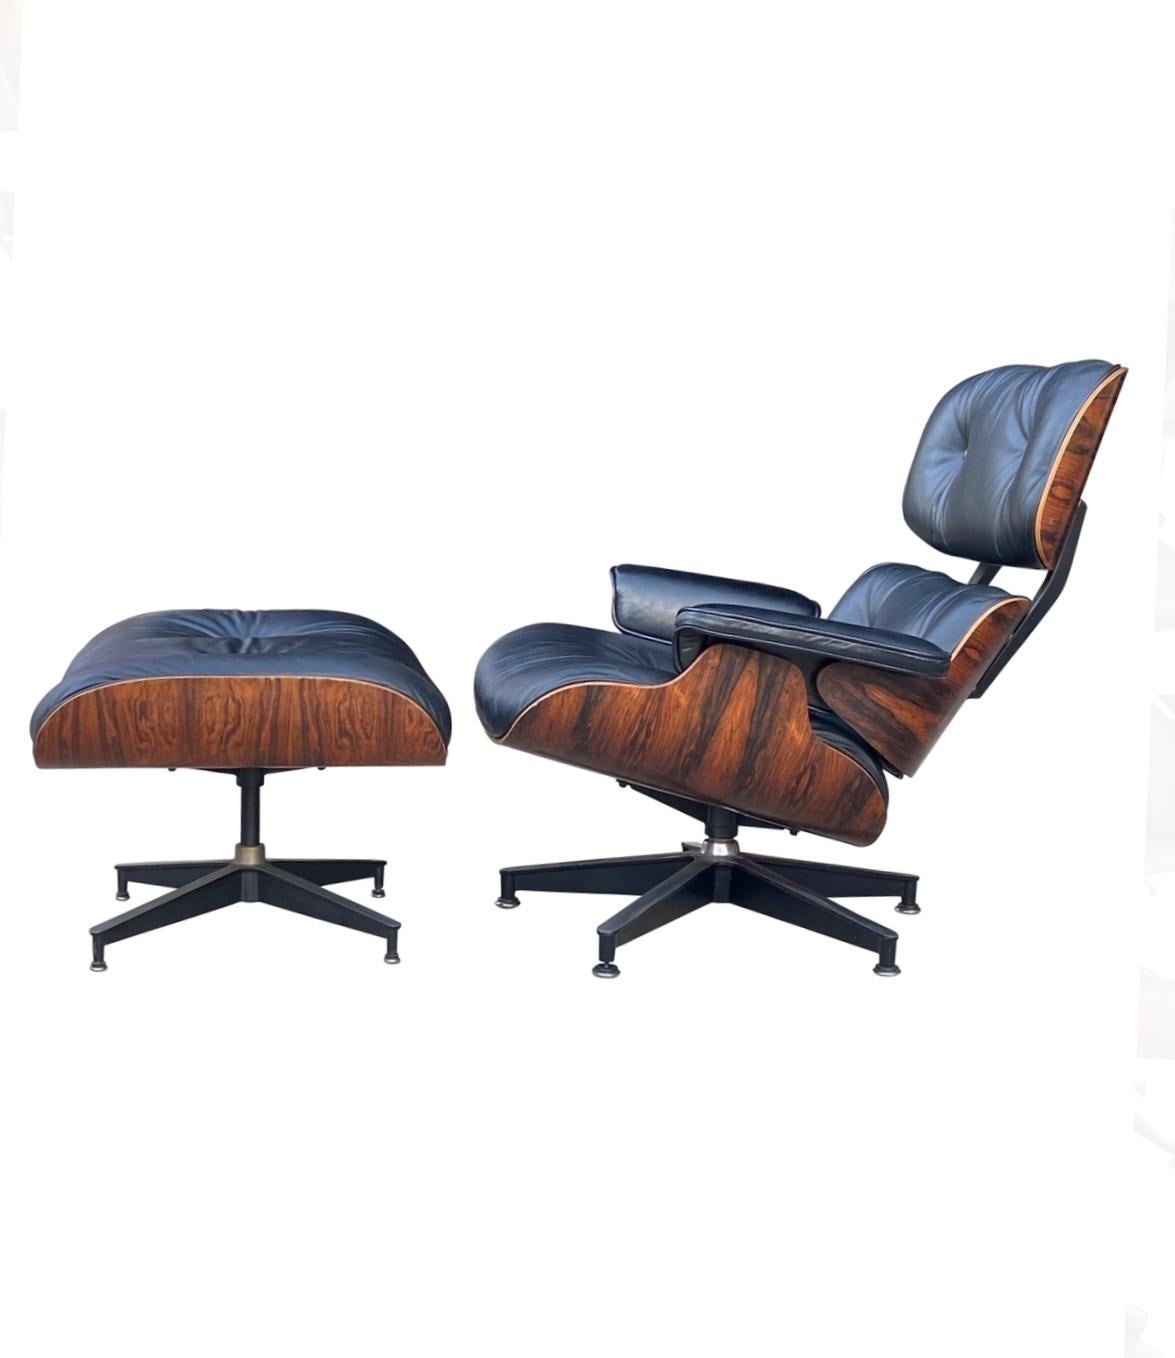 An exemplary edition of the Eames lounge chair and ottoman produced by Herman Miller. The rosewood grains and color on this set are simply stunning. Original chair and ottoman set. Black leather cushions in good condition and extremely comfortable.